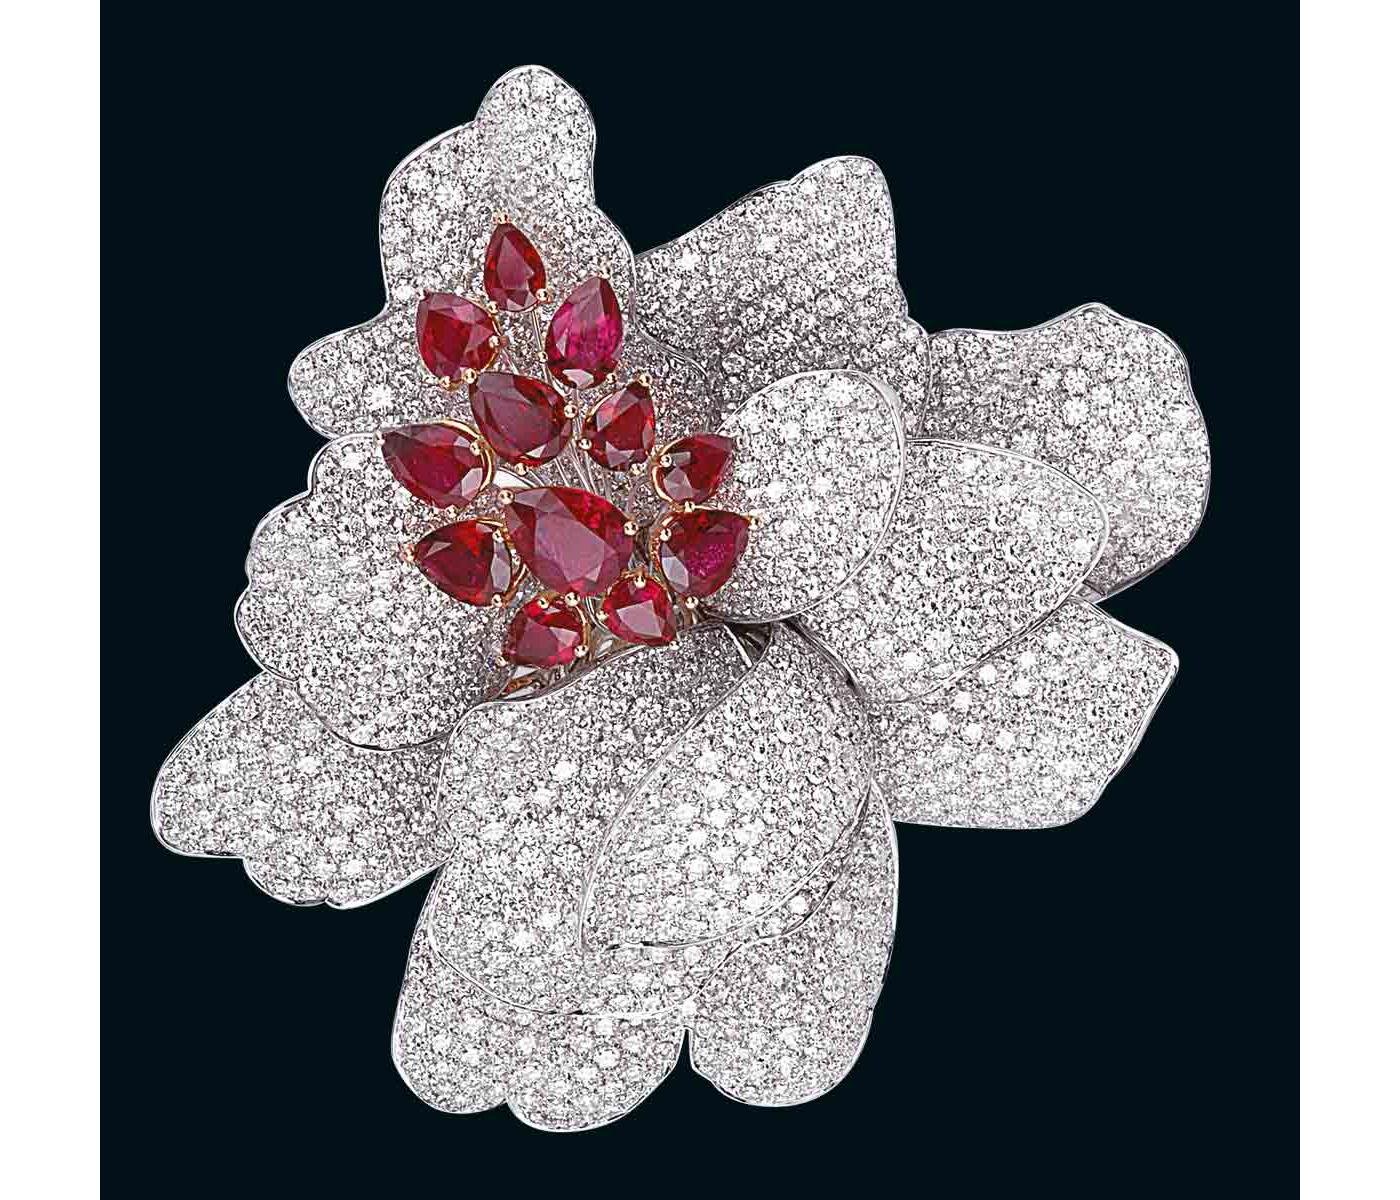 Brooch by Picchiotti